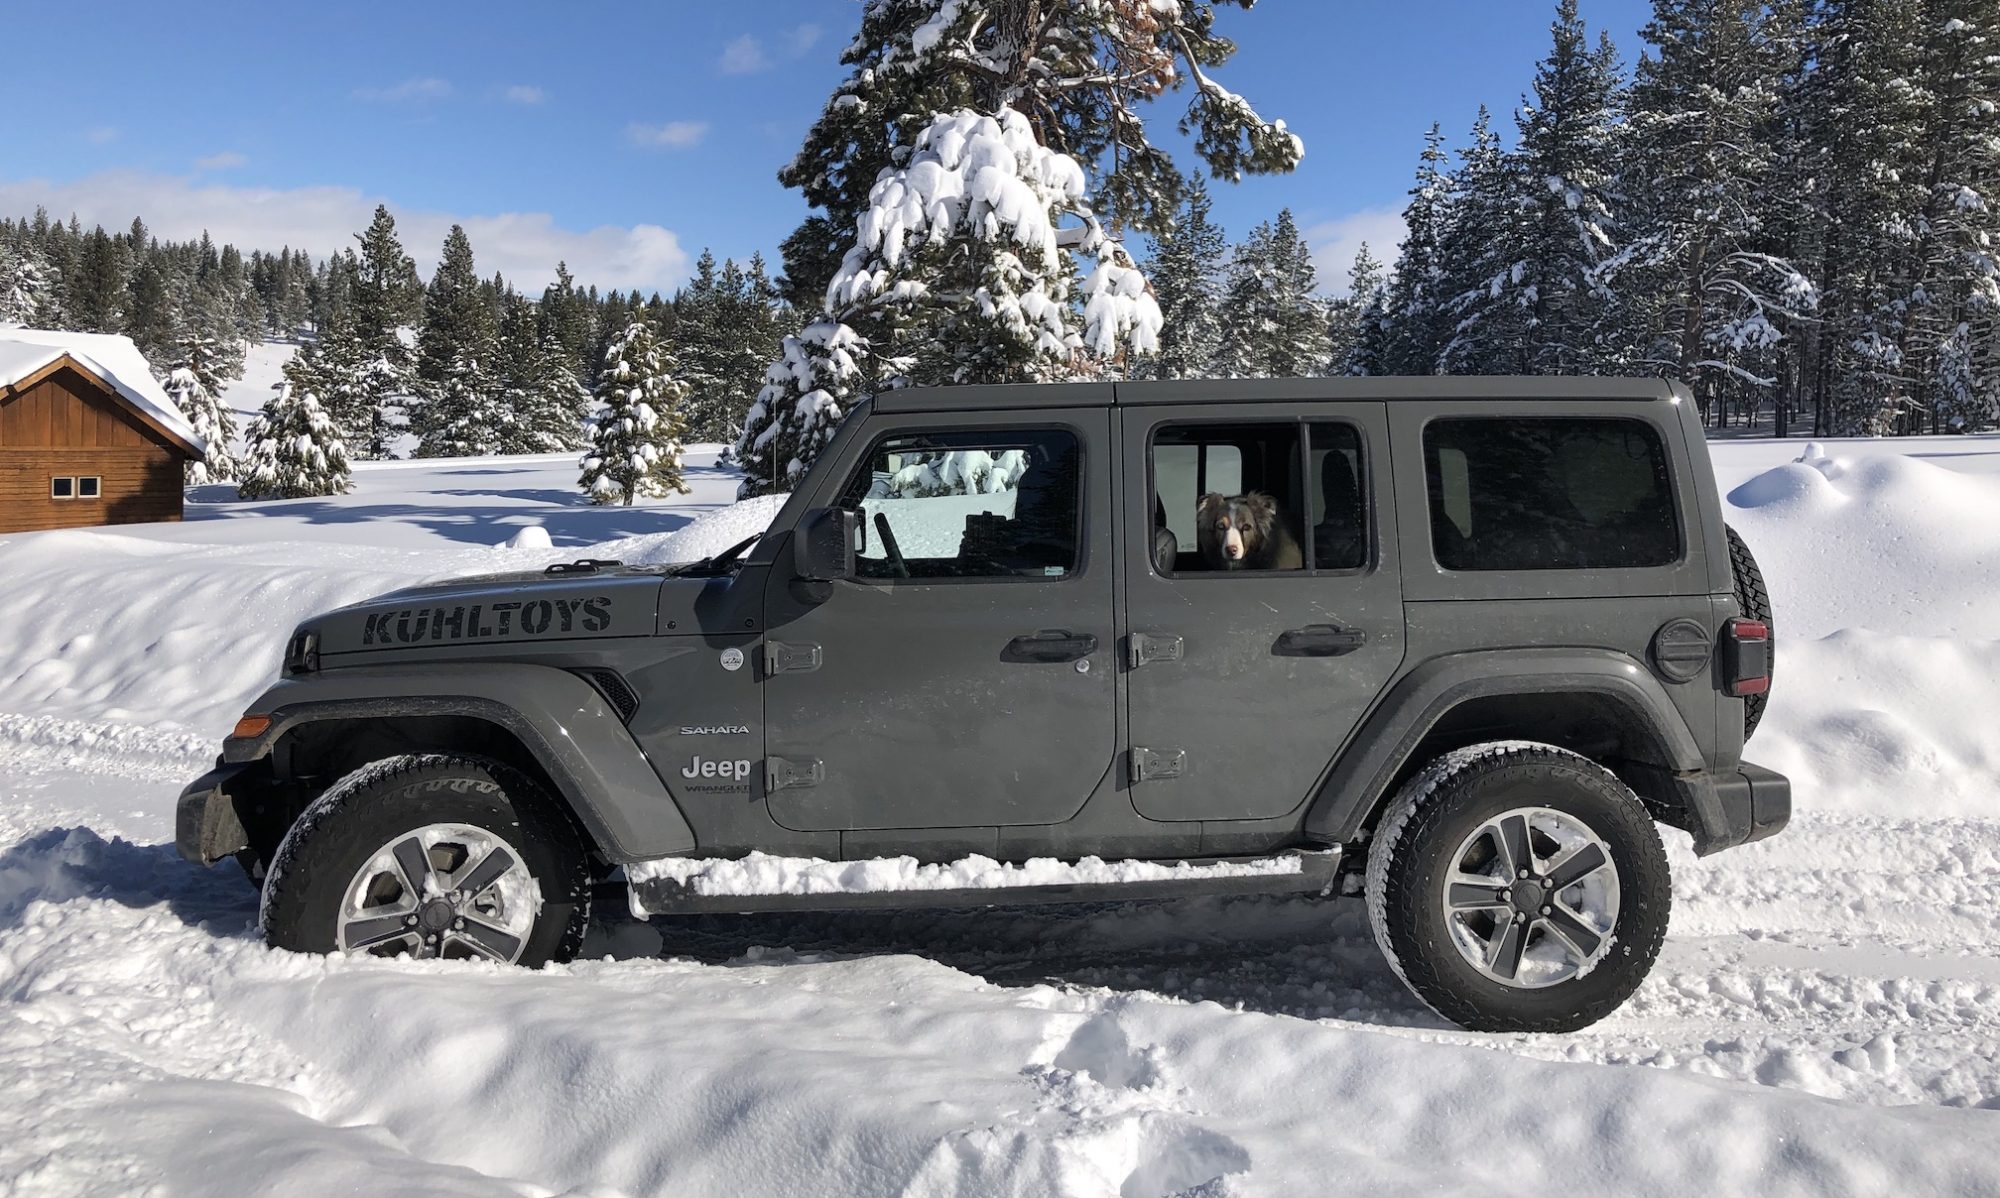 COOLTOYS TV Jeep In Snow